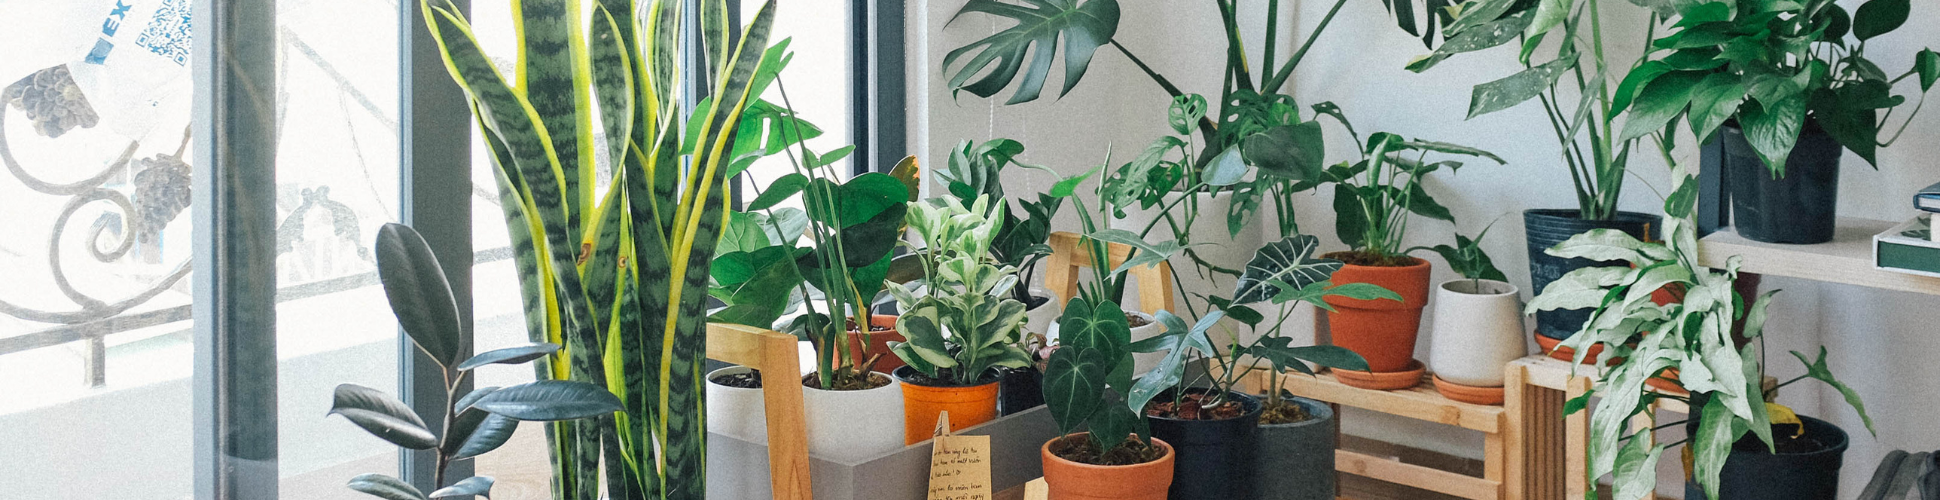 5 Best Indoor Plants and How to Care for Them